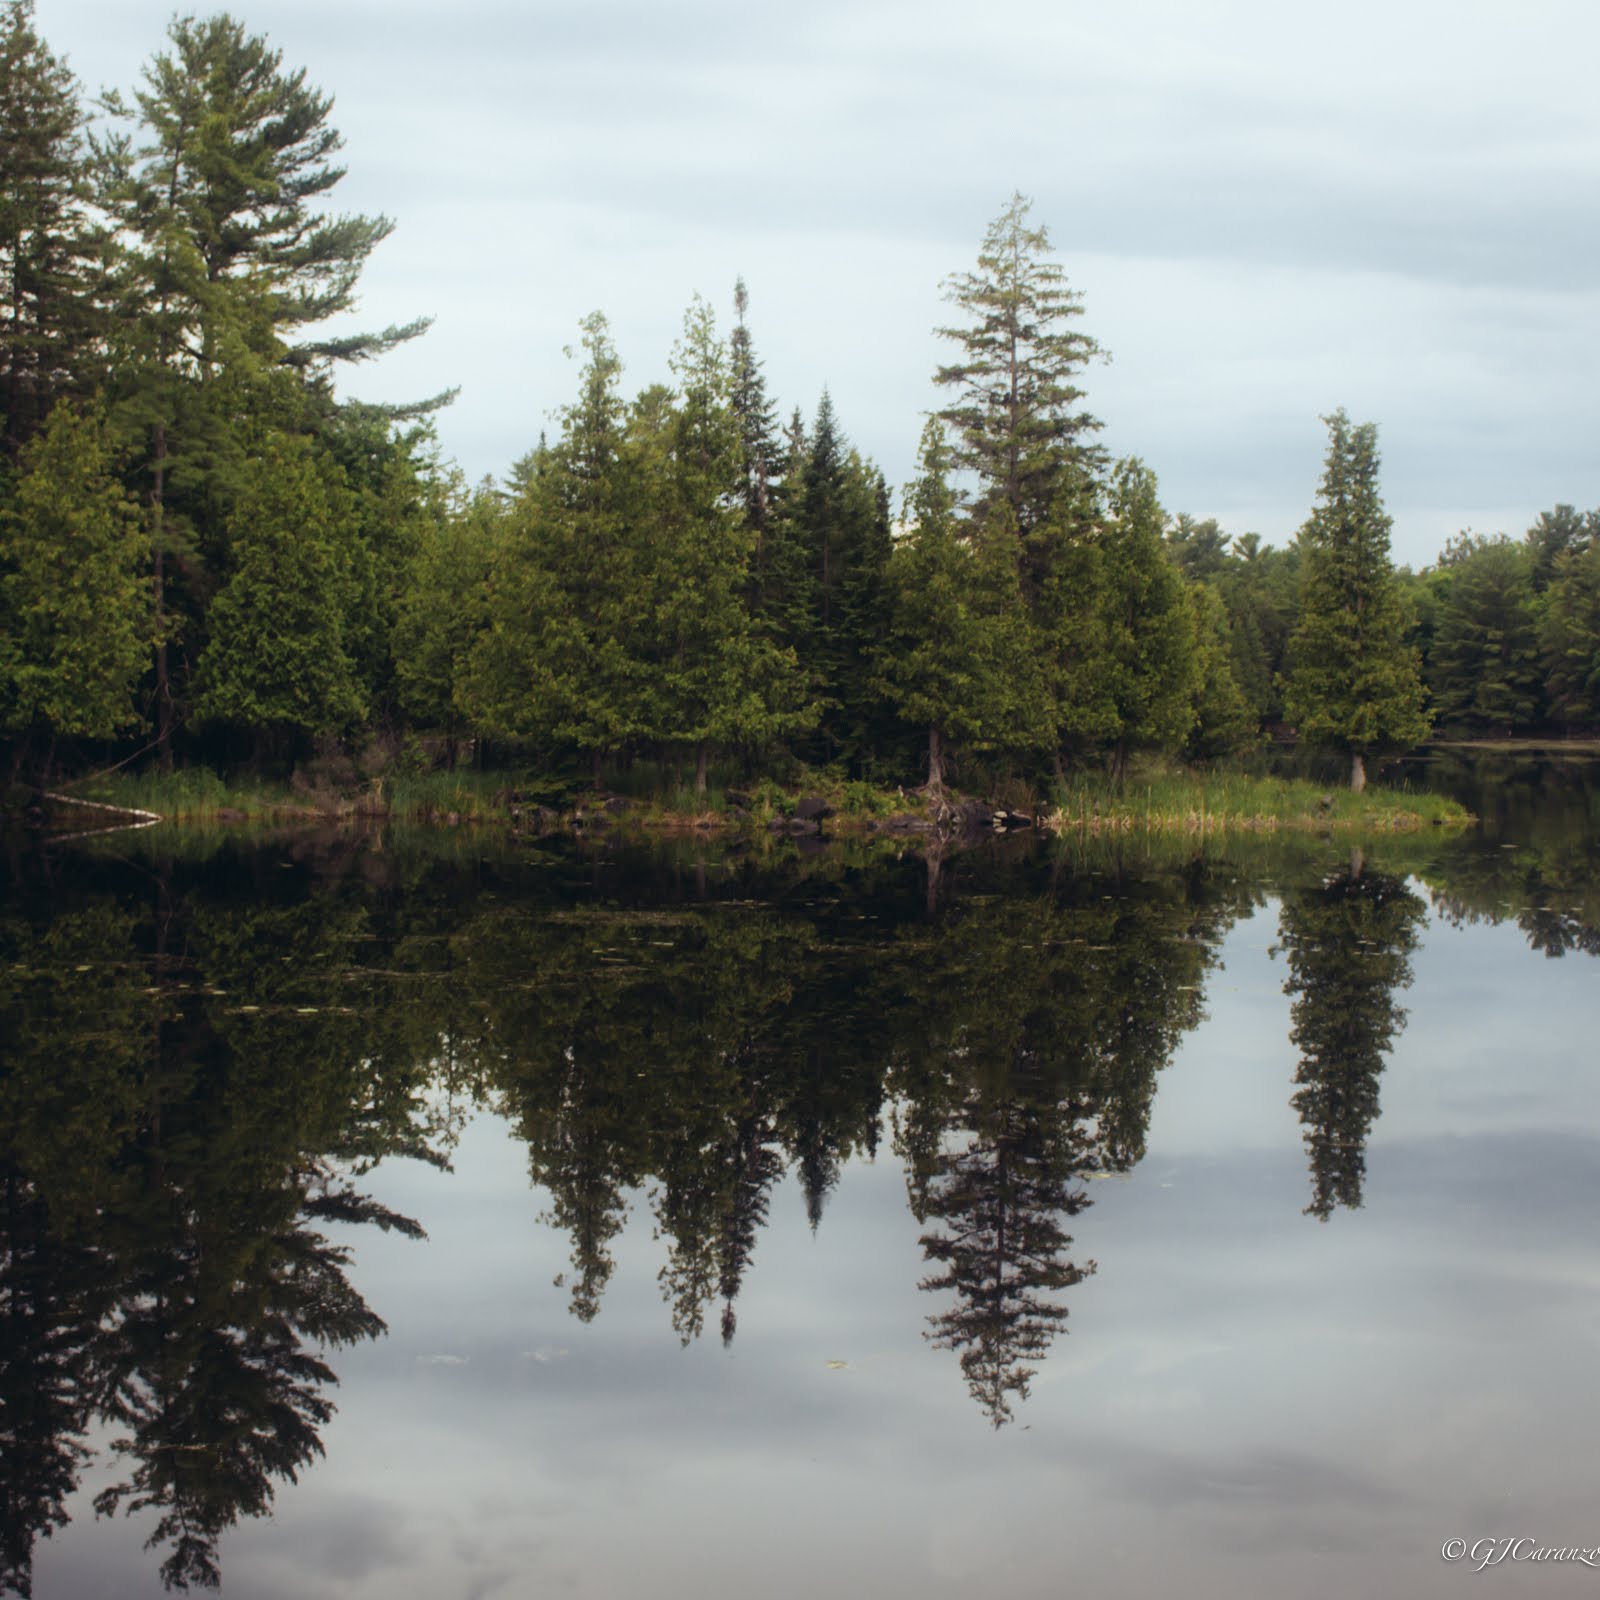 Morris Island Conservation Area: A Short Day Trip from Ottawa, Ontario